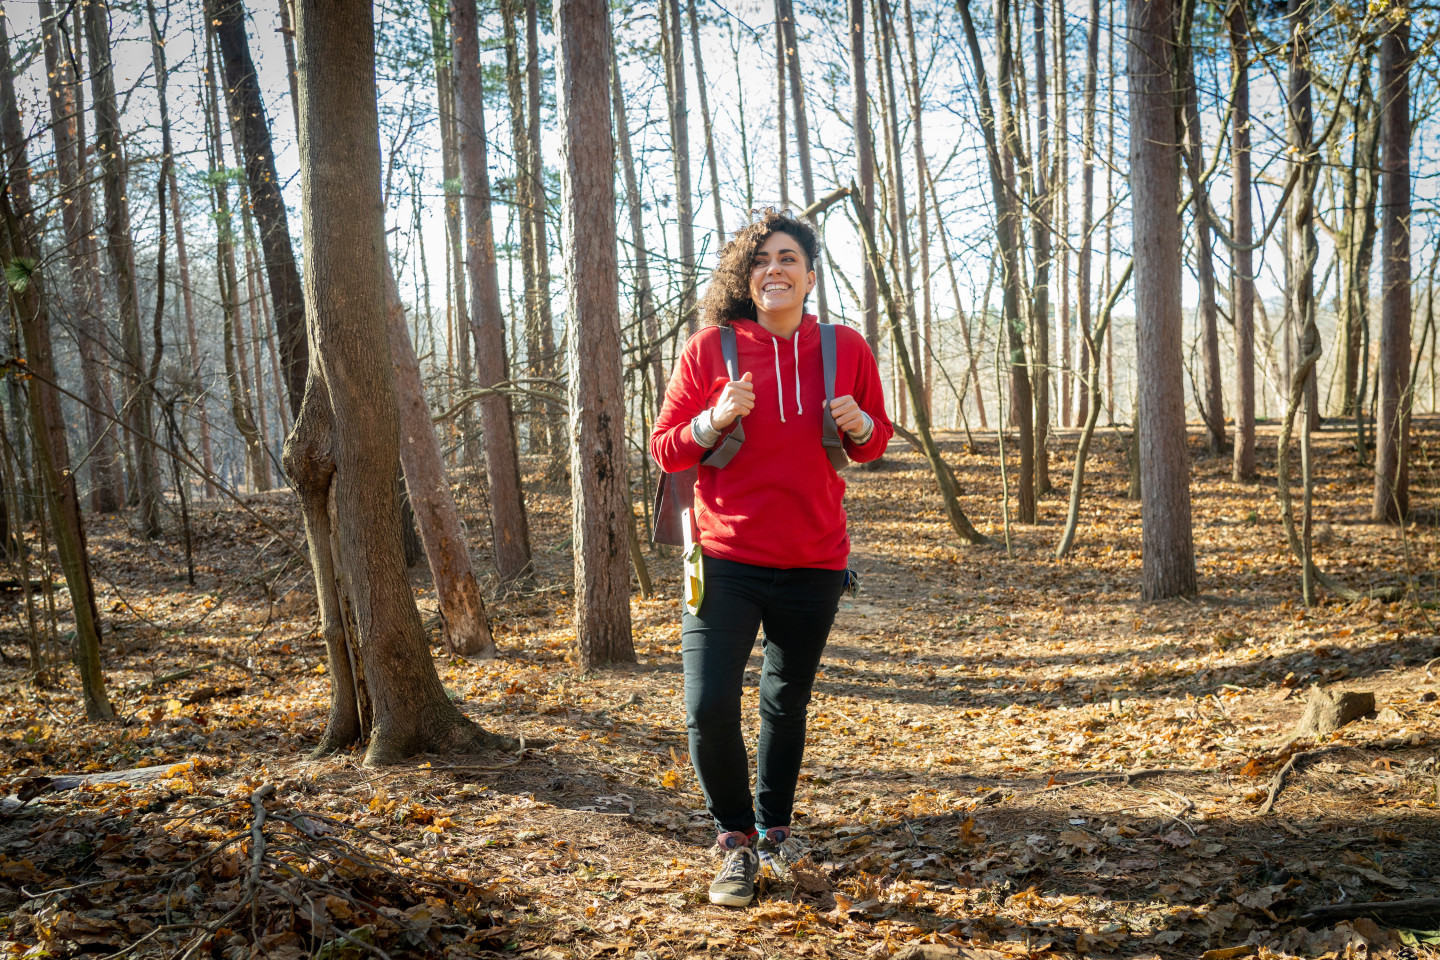 Gabrielle Cerberville stands in a forest.